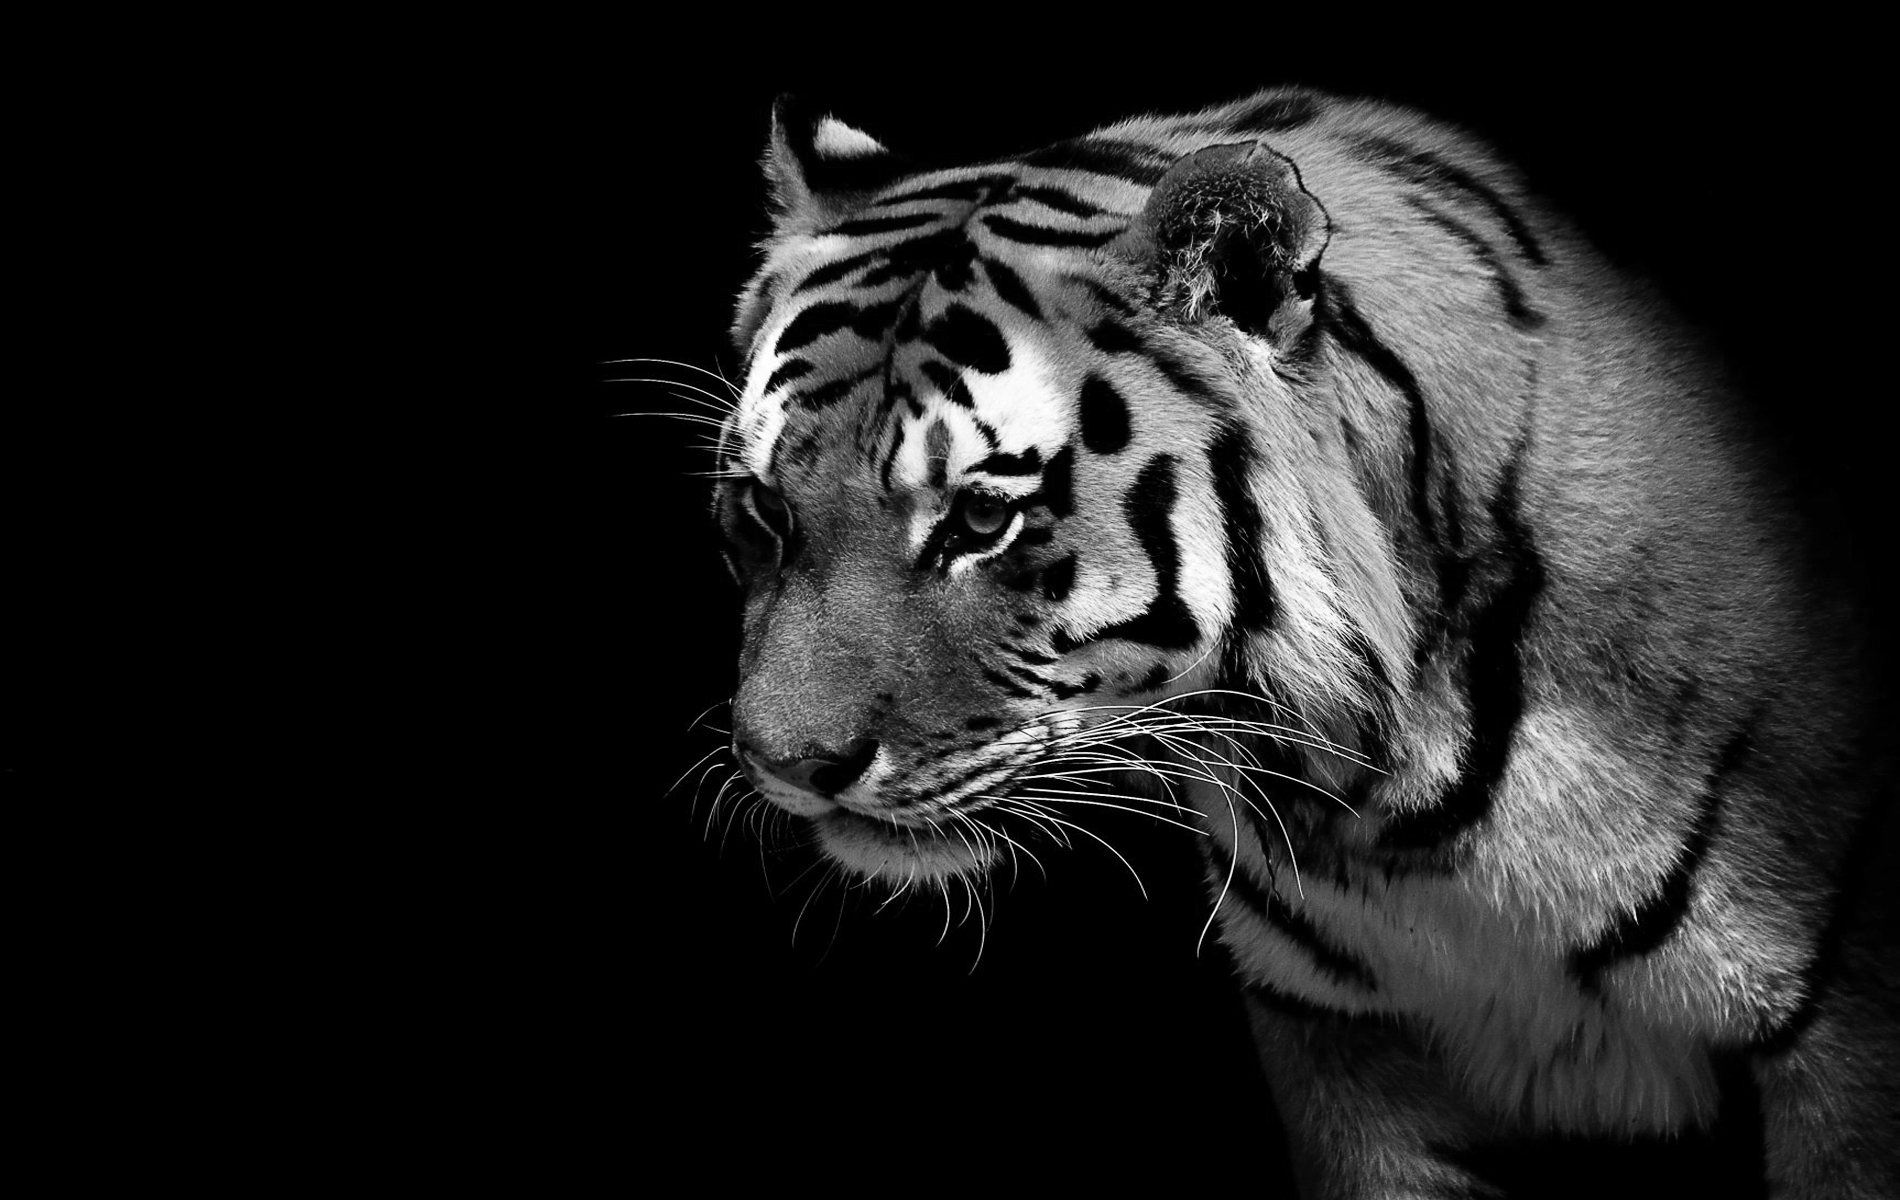 Wallpapers Of Lions And Tigers - Tiger Black And White - HD Wallpaper 